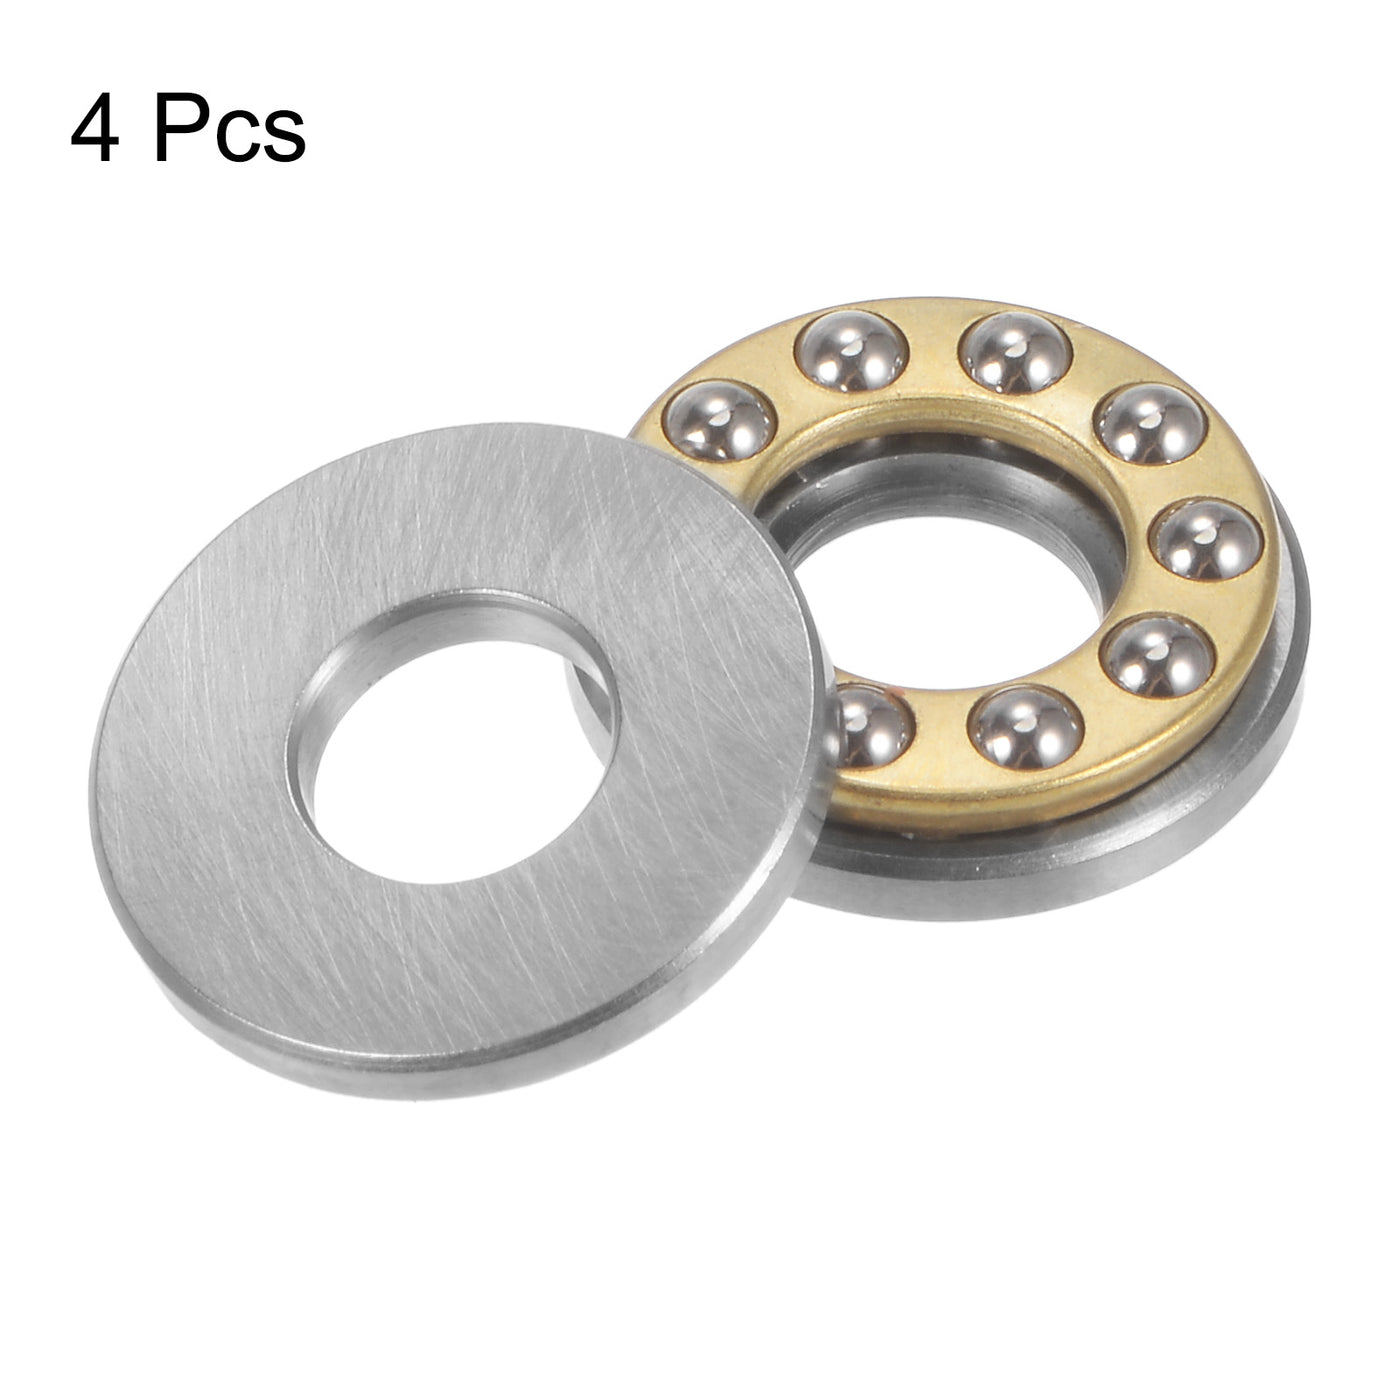 uxcell Uxcell F8-19M Thrust Ball Bearing 8x19x7mm Brass with Washers 4pcs